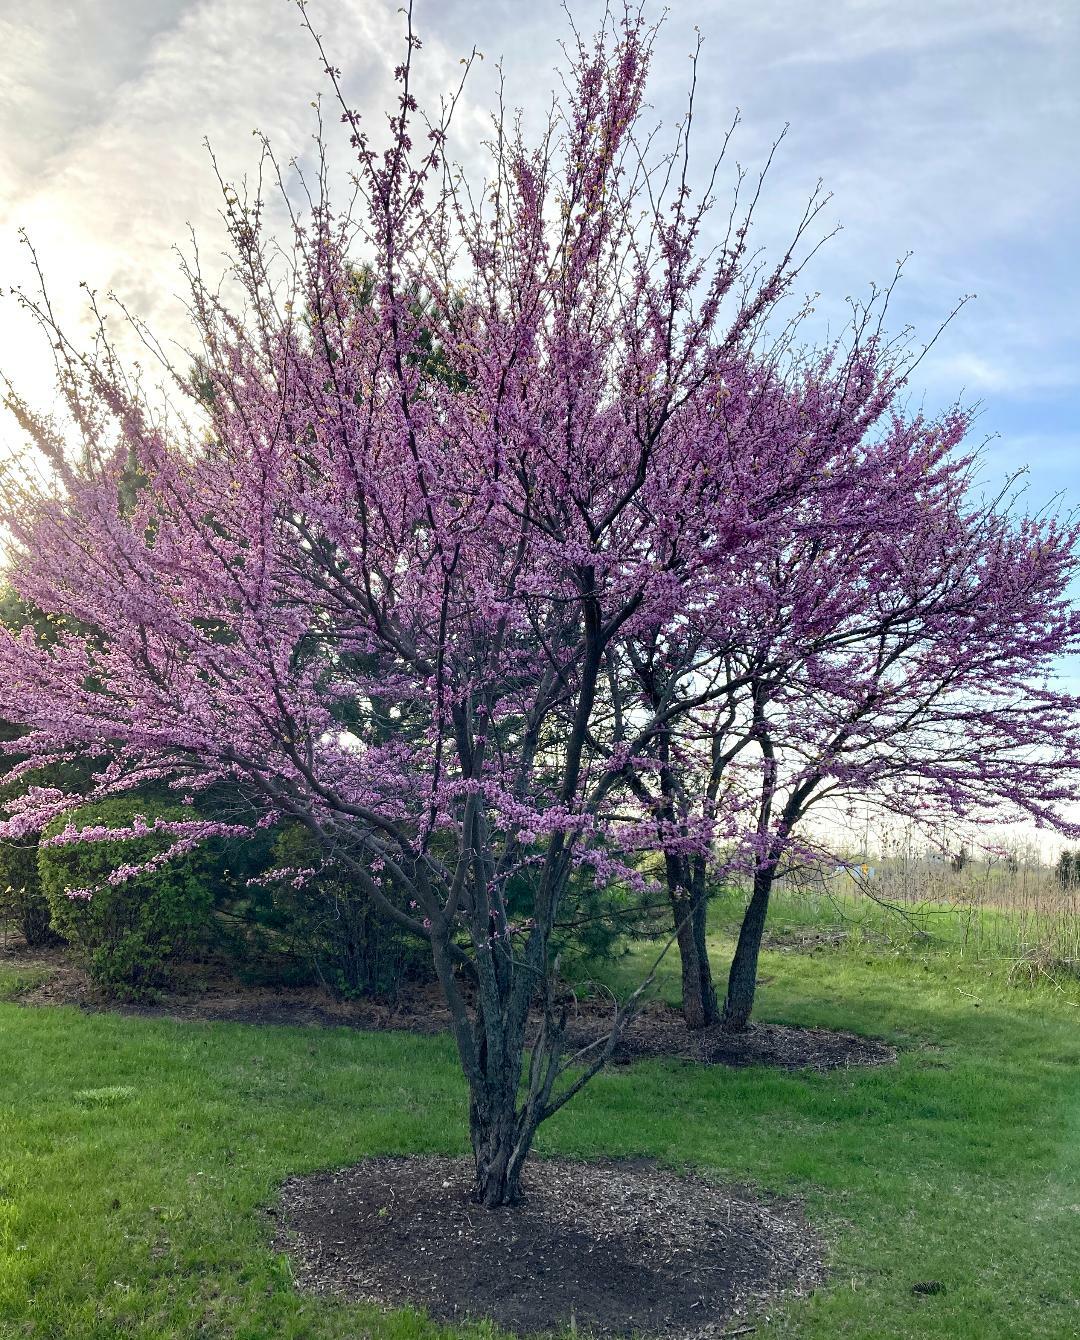 Two Redbud trees in full bloom surrounded by lawn. Shrubs and taller grasses can be seen in the background.